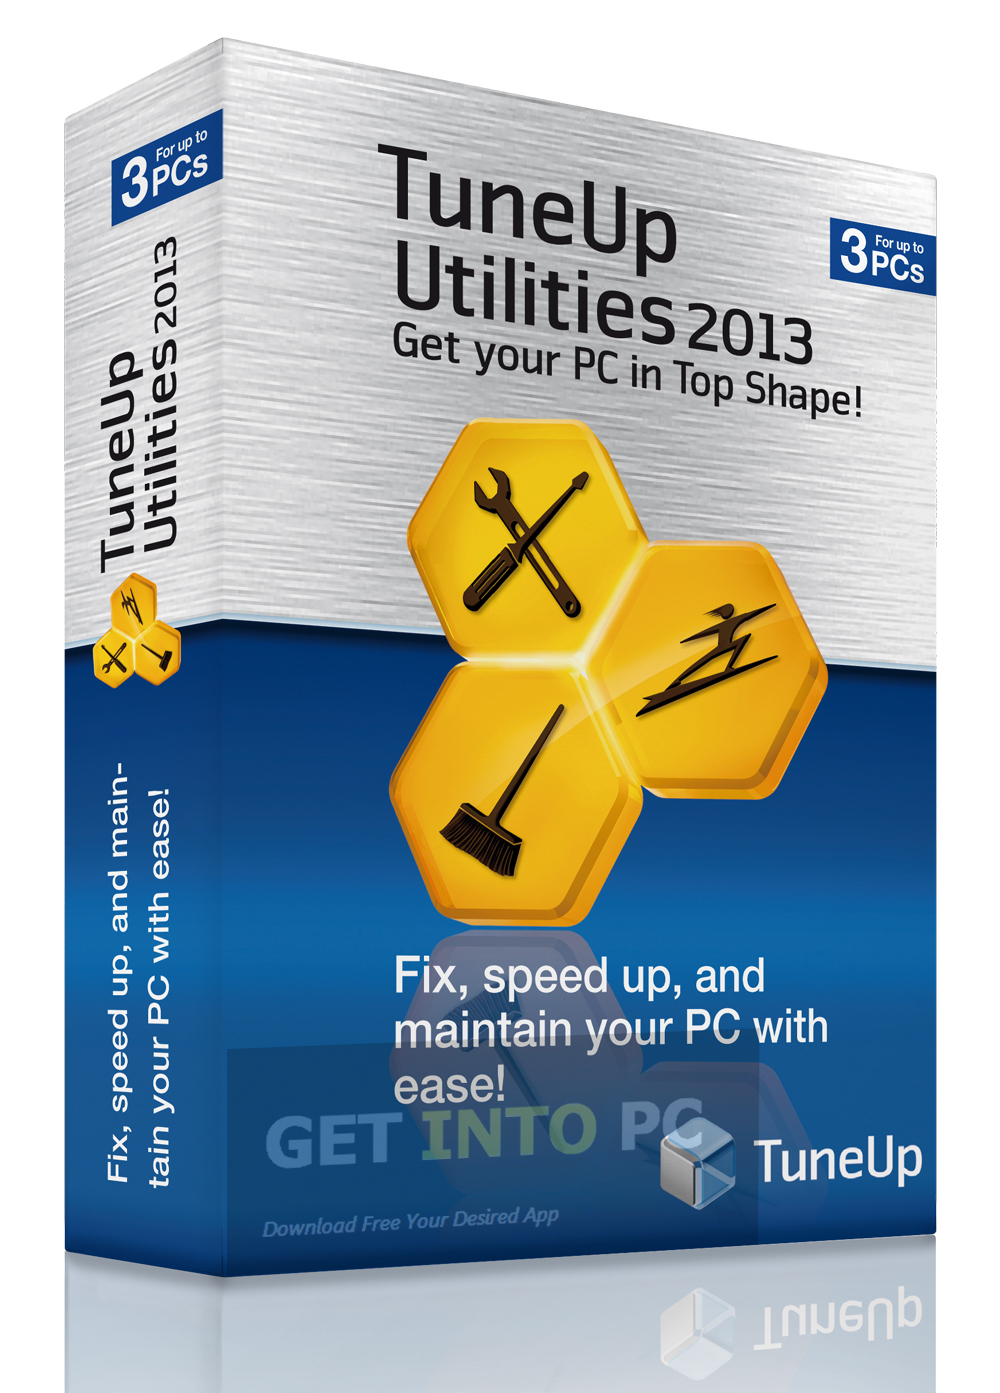 Tuneup utilities free download